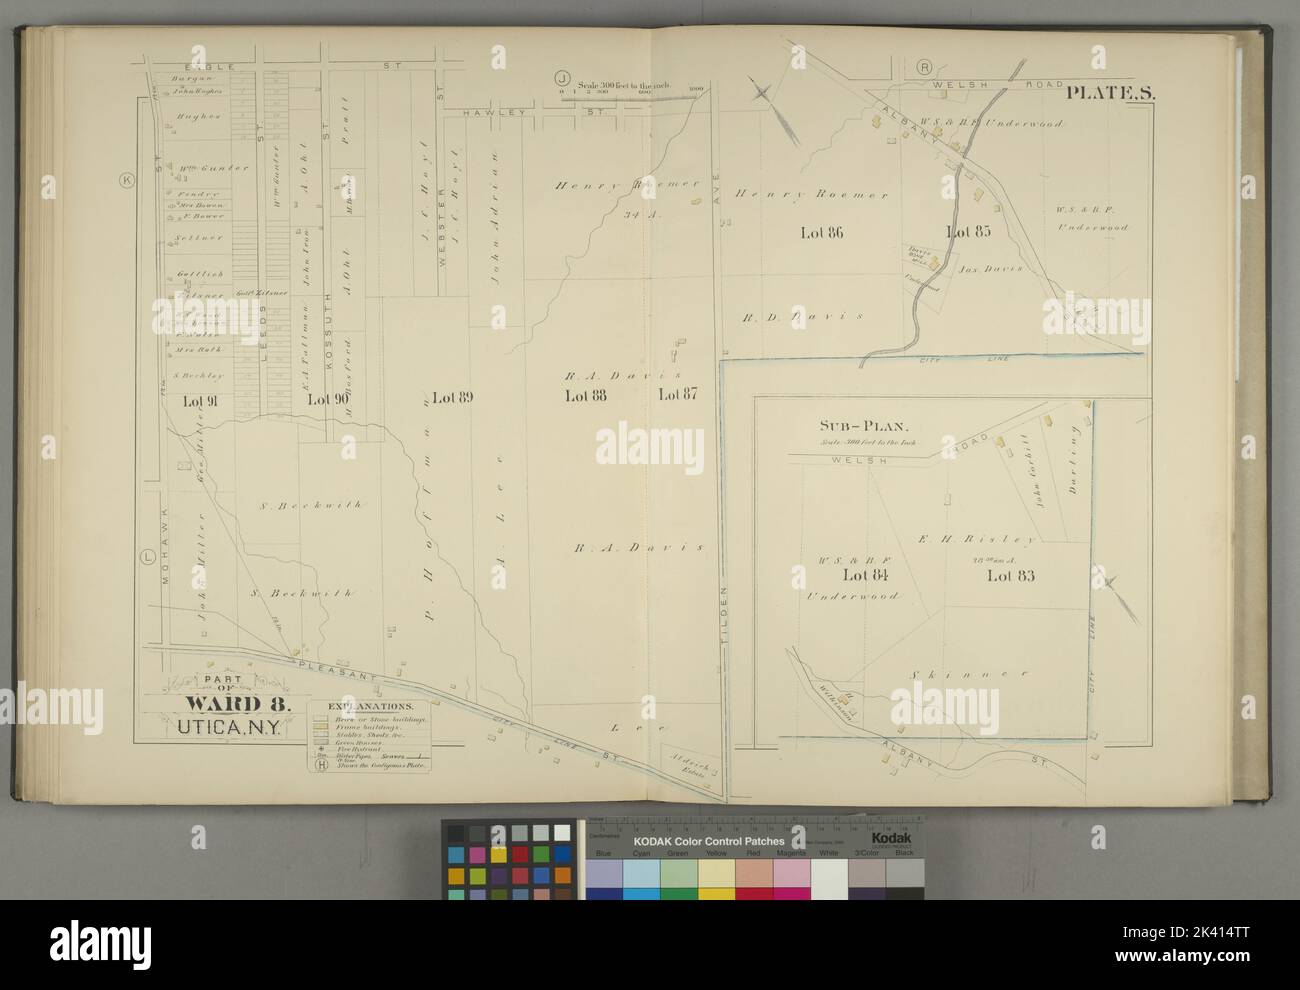 Part of Ward 8. Cartographic. Atlases, Maps. 1883. Lionel Pincus and Princess Firyal Map Division. Utica (N.Y.) Stock Photo